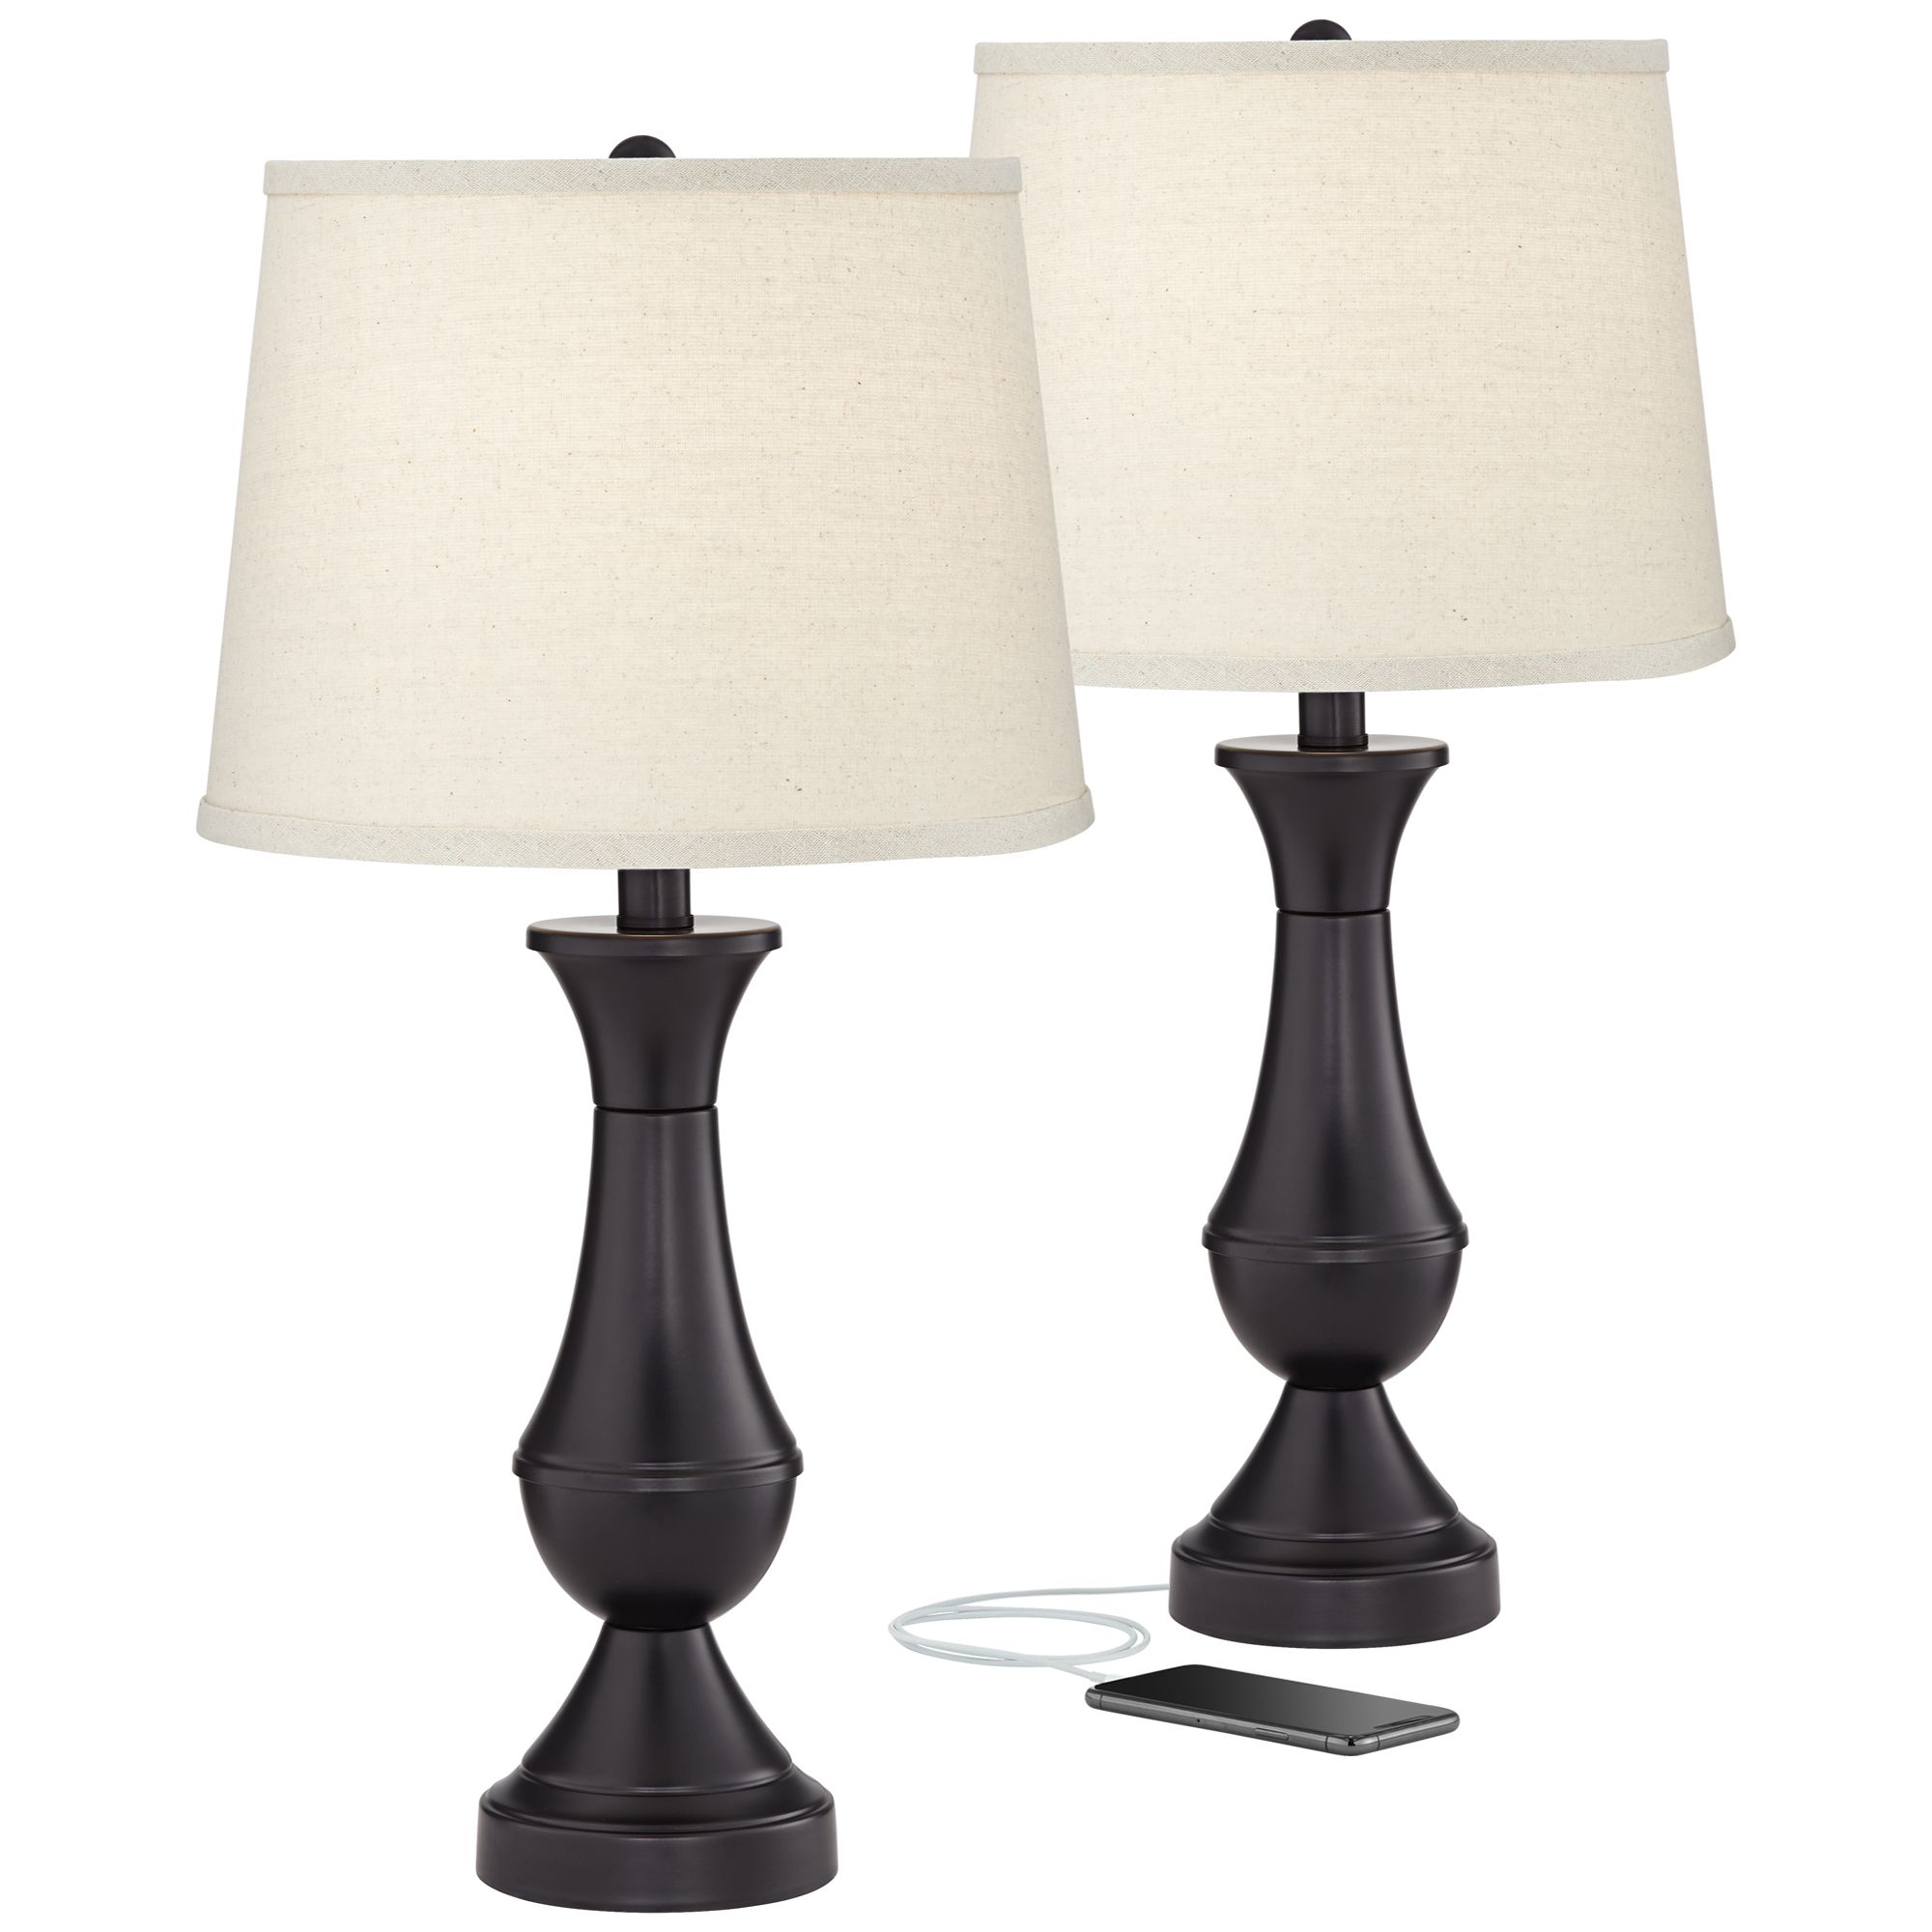 small touch bedside lamps